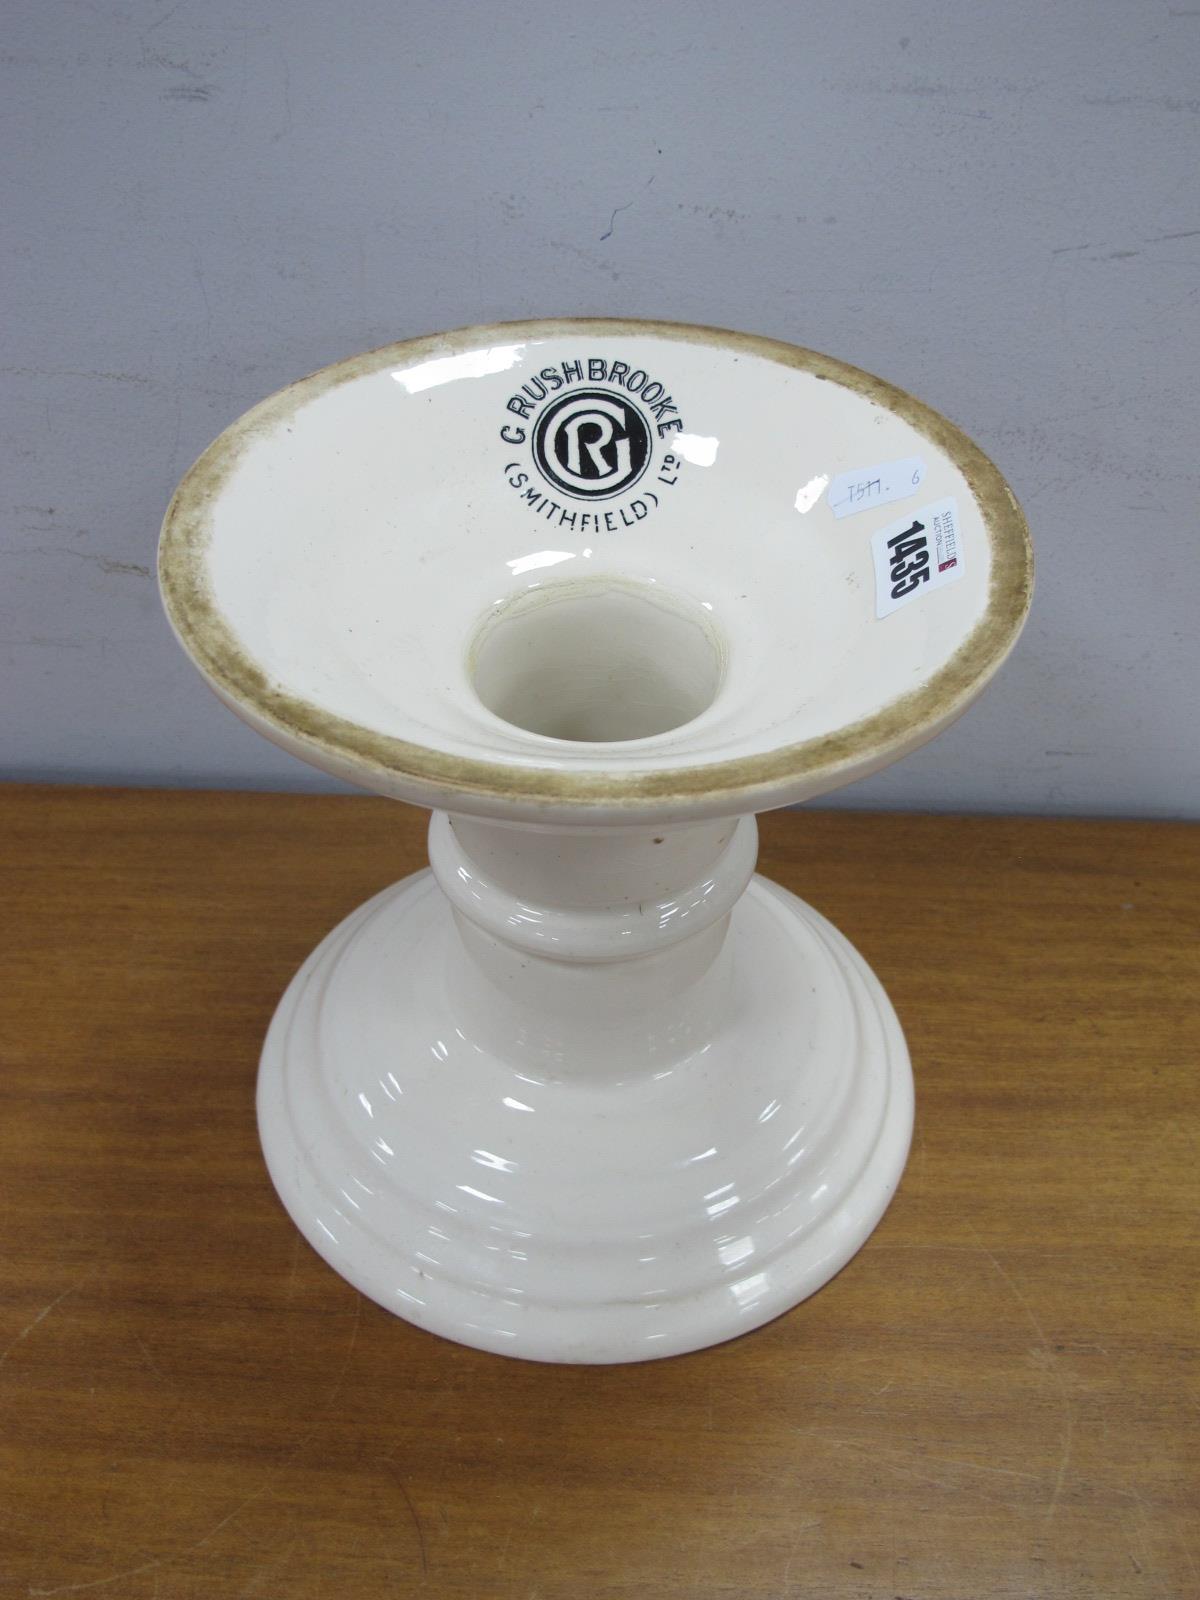 An Early XX Century Porcelain Circular Meat Stand, marked 'G. Rushbrooke (Smithfield) Ltd', 19cm